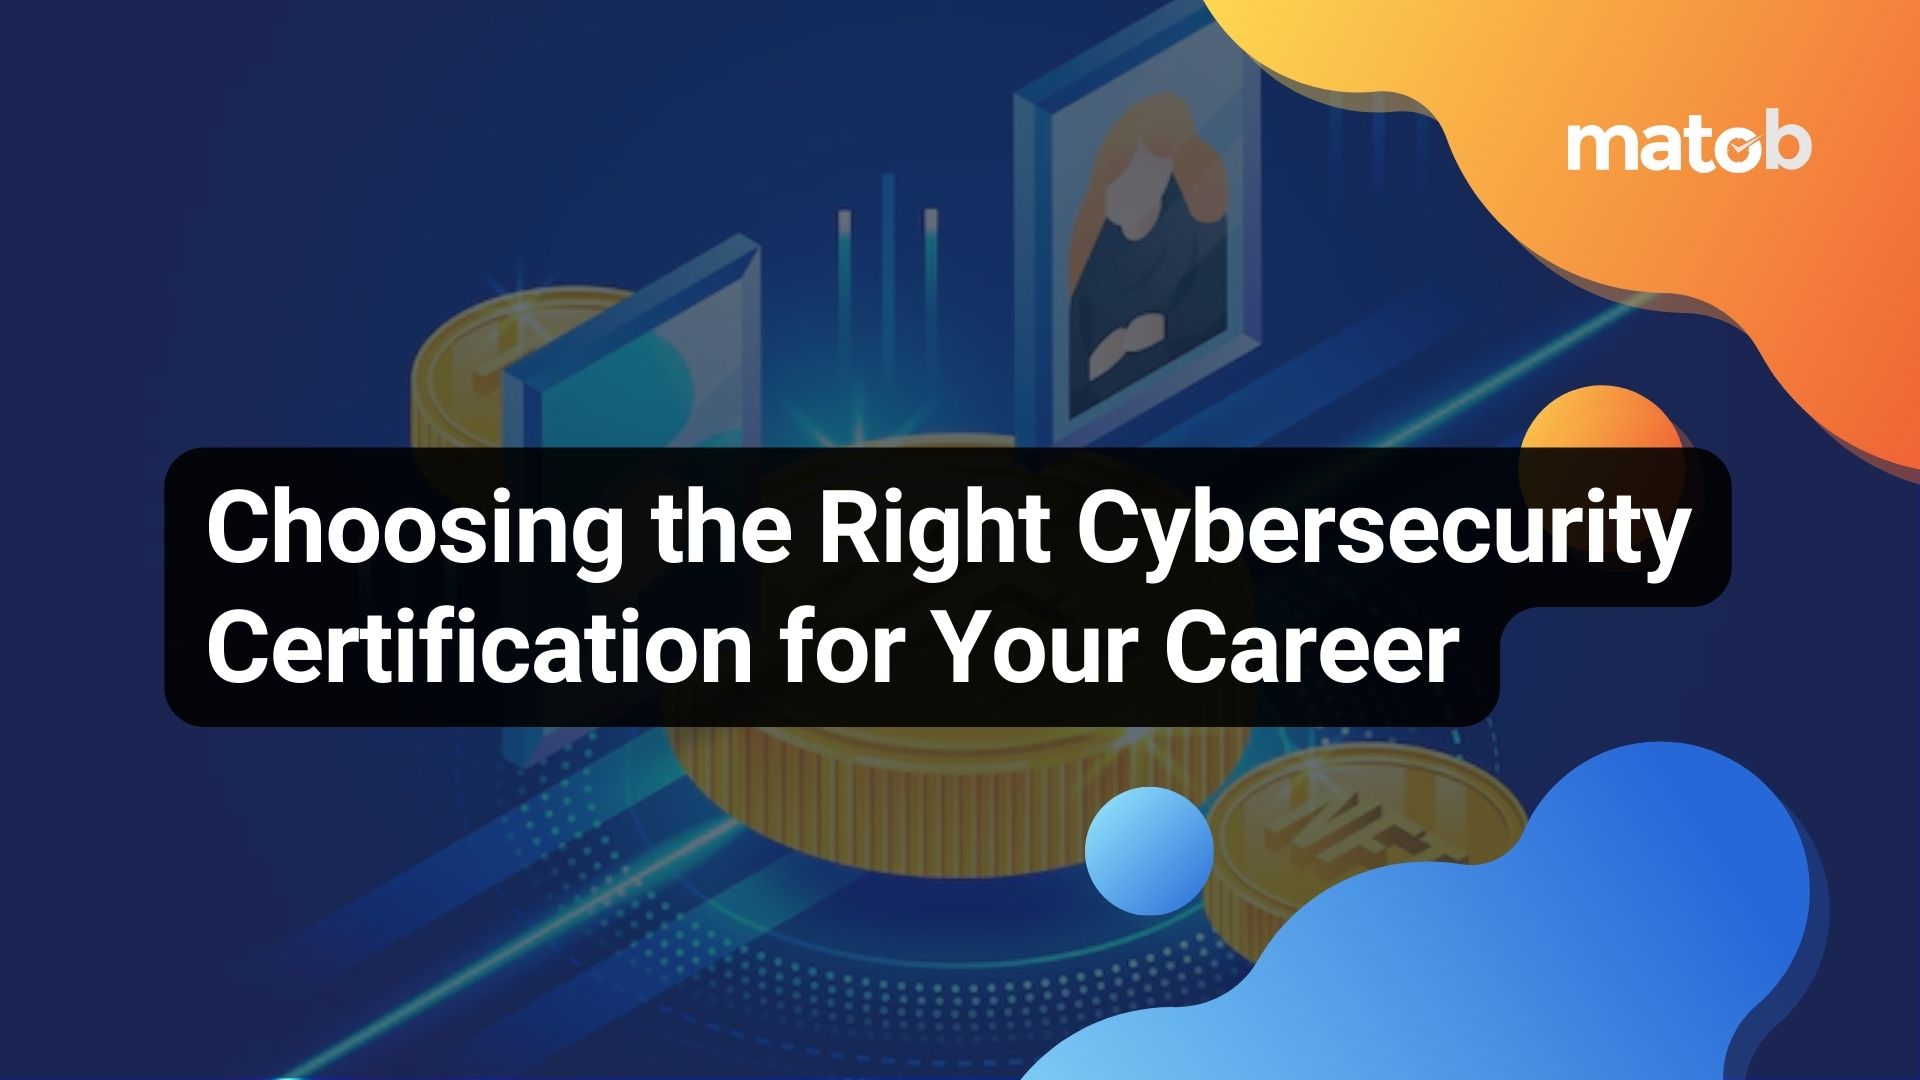 Choosing the Right Cybersecurity Certification for Your Career